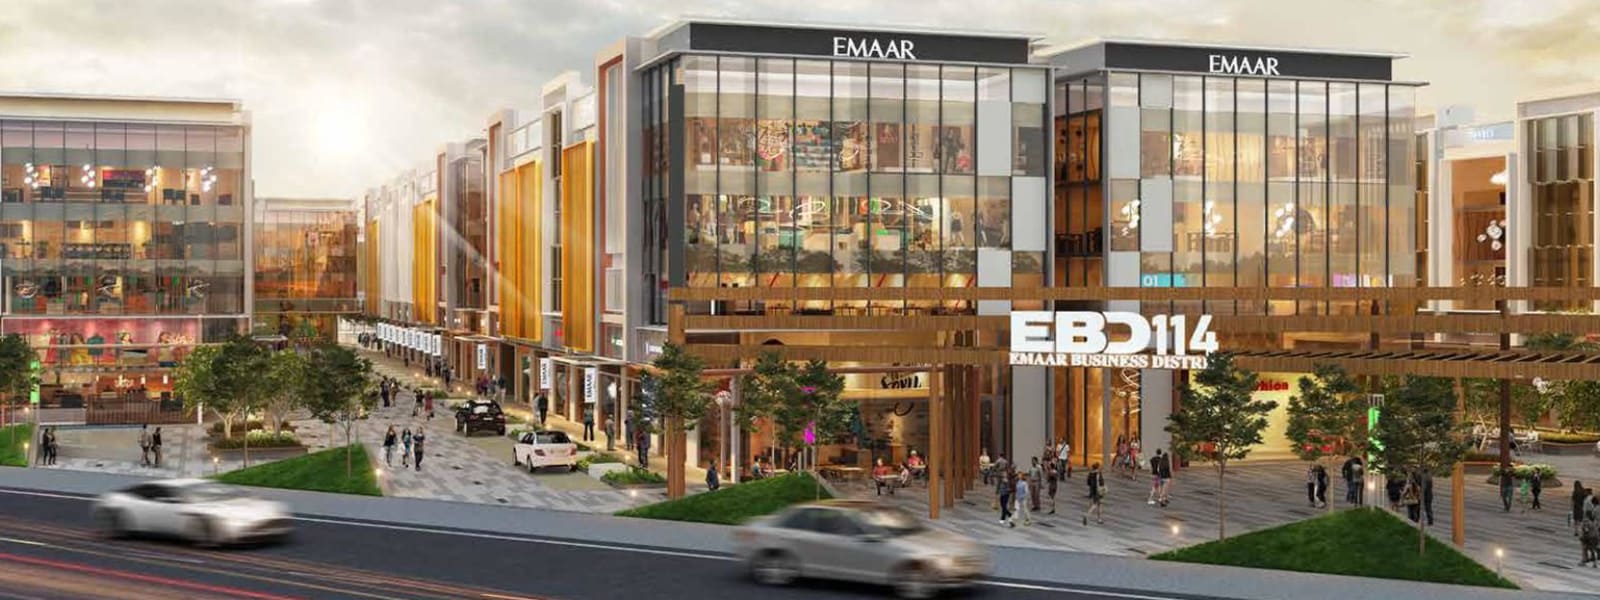 Emaar Commercial Projects in Gurgaon